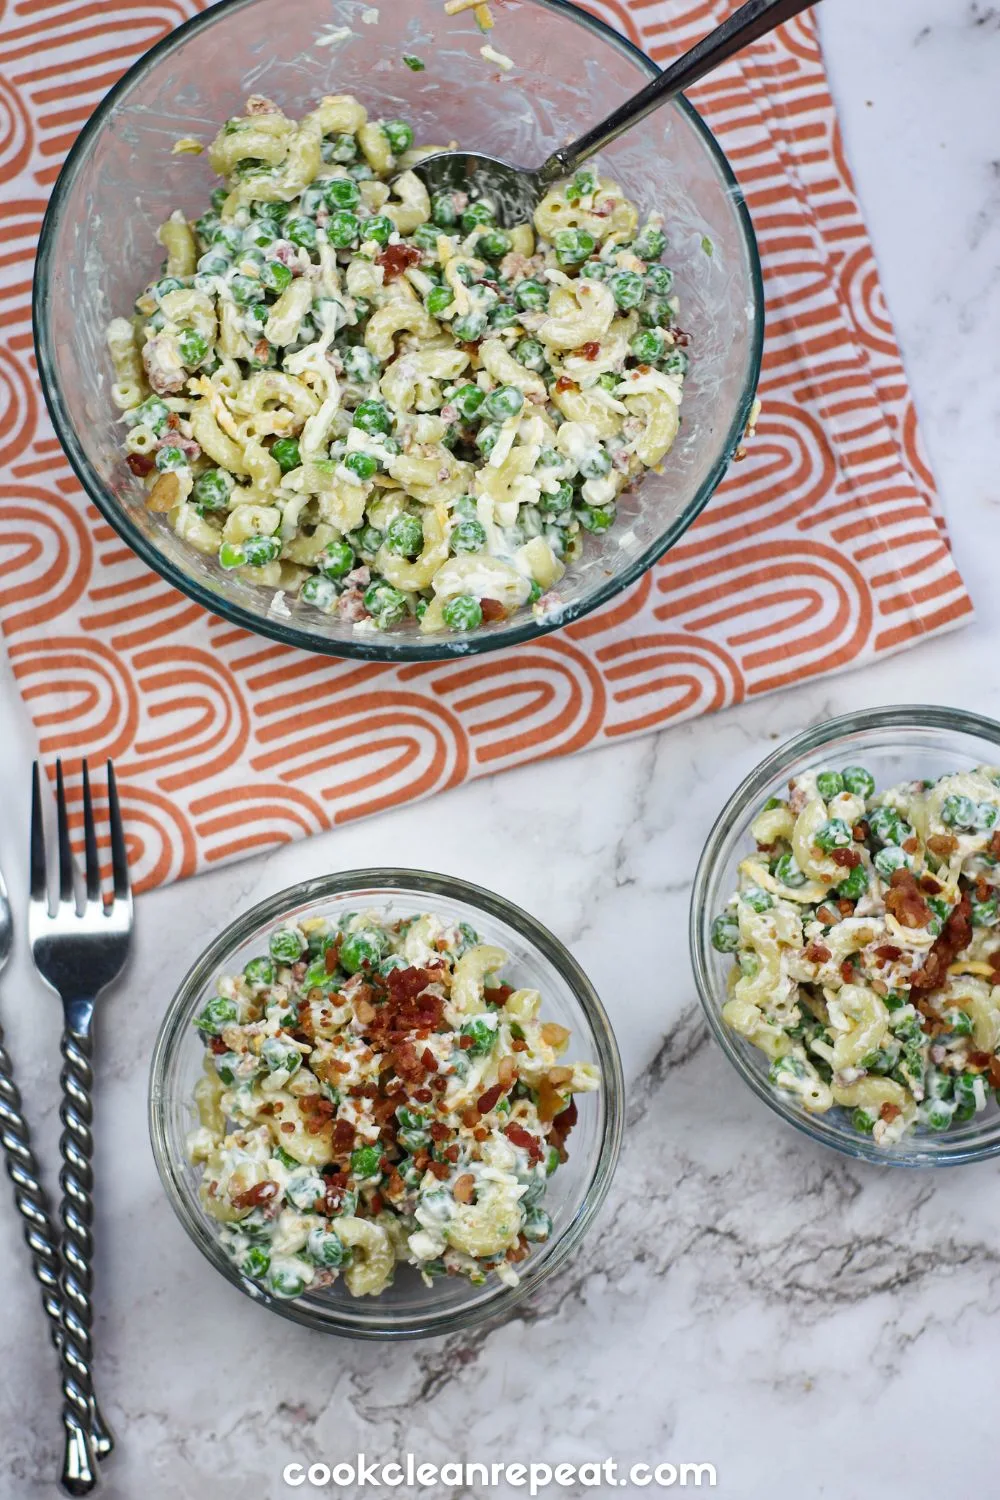 two small bowls of pea and pasta salad with the larger bowl of the whole mix above them